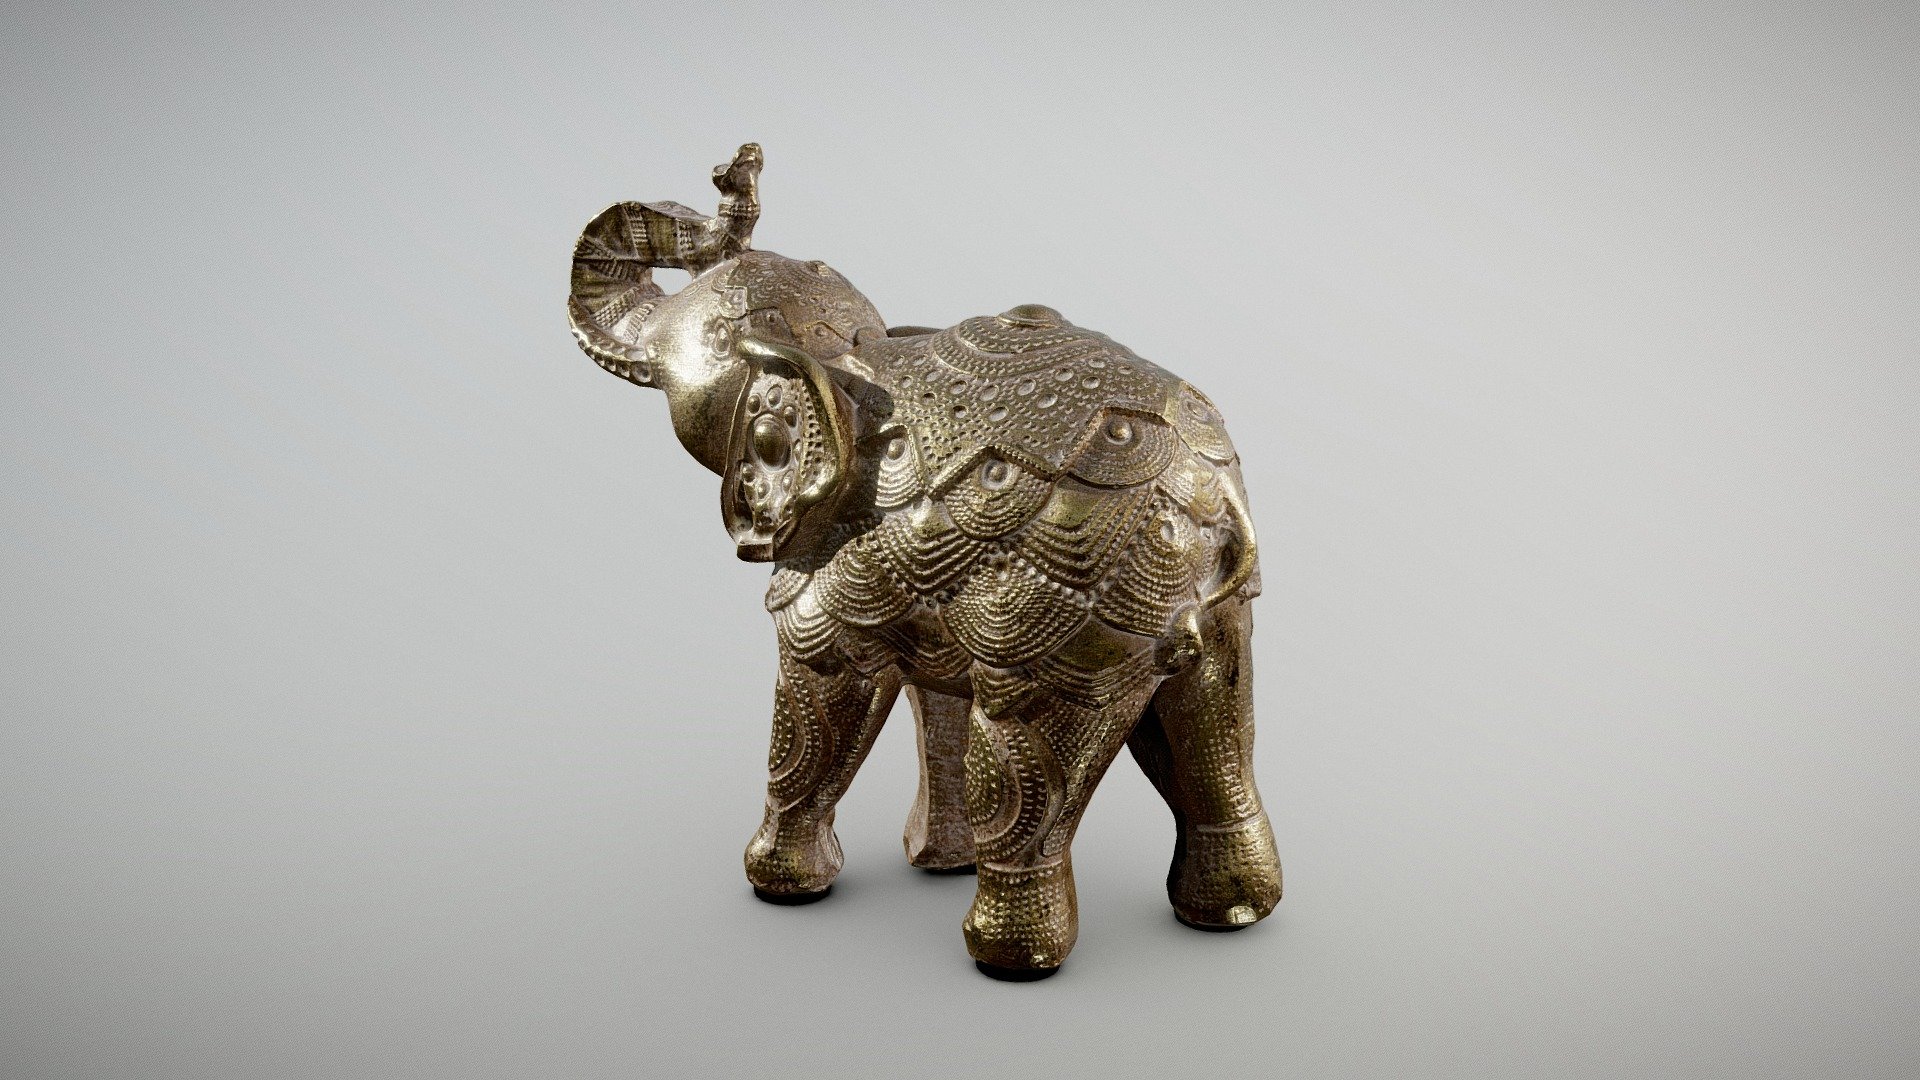 Golden Elephant Statue with Trunk Up 

This Elephant statue is made of resin material and painted in muted metallic gold color, whitewashed and not too flashy and garish.
 This Golden Elephant figurine is a great addition to your virtual decoration scene.

10.0 x 4.5 x 9.8 cm (43 micrometers per texel @ 4k)

Scanned using advanced technology developed by inciprocal Inc. that enables highly photo-realistic reproduction of real-world products in virtual environments. Our hardware and software technology combines advanced photometry, structured light, photogrammtery and light fields to capture and generate accurate material representations from tens of thousands of images targeting real-time and offline path-traced PBR compatible renderers.

Zip file includes low-poly OBJ mesh (in meters) with a set of 4k PBR textures compressed with lossless JPEG (no chroma sub-sampling) 3d model